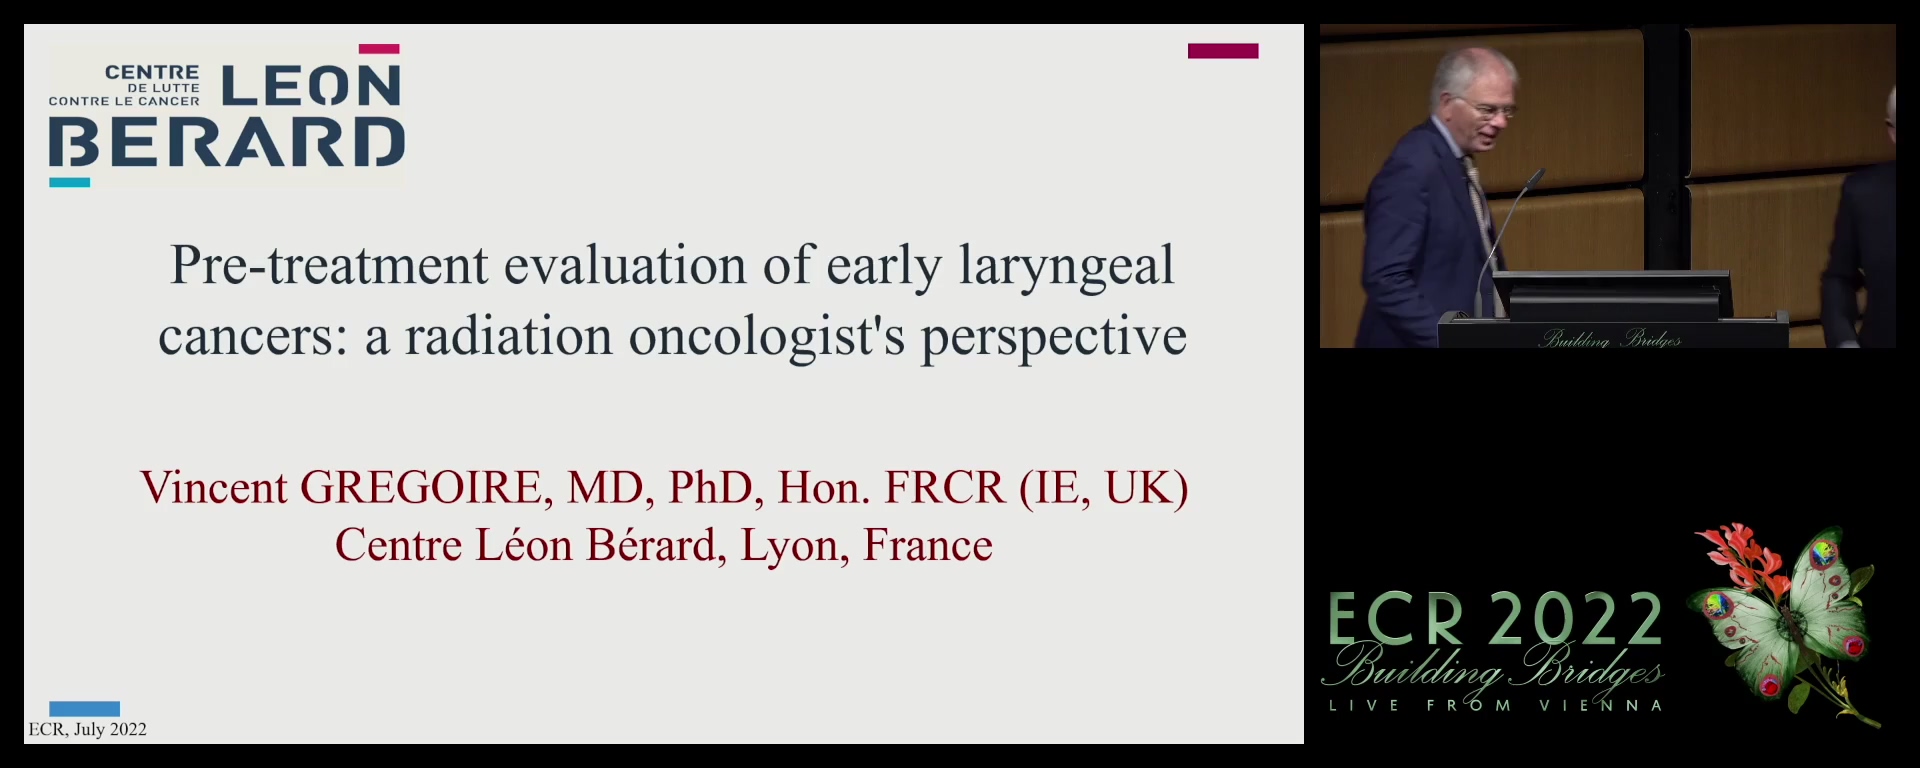 Pre-treatment evaluation of early laryngeal cancers: a radiation oncologist's perspective - Vincent Gregoire, Lyon / FR